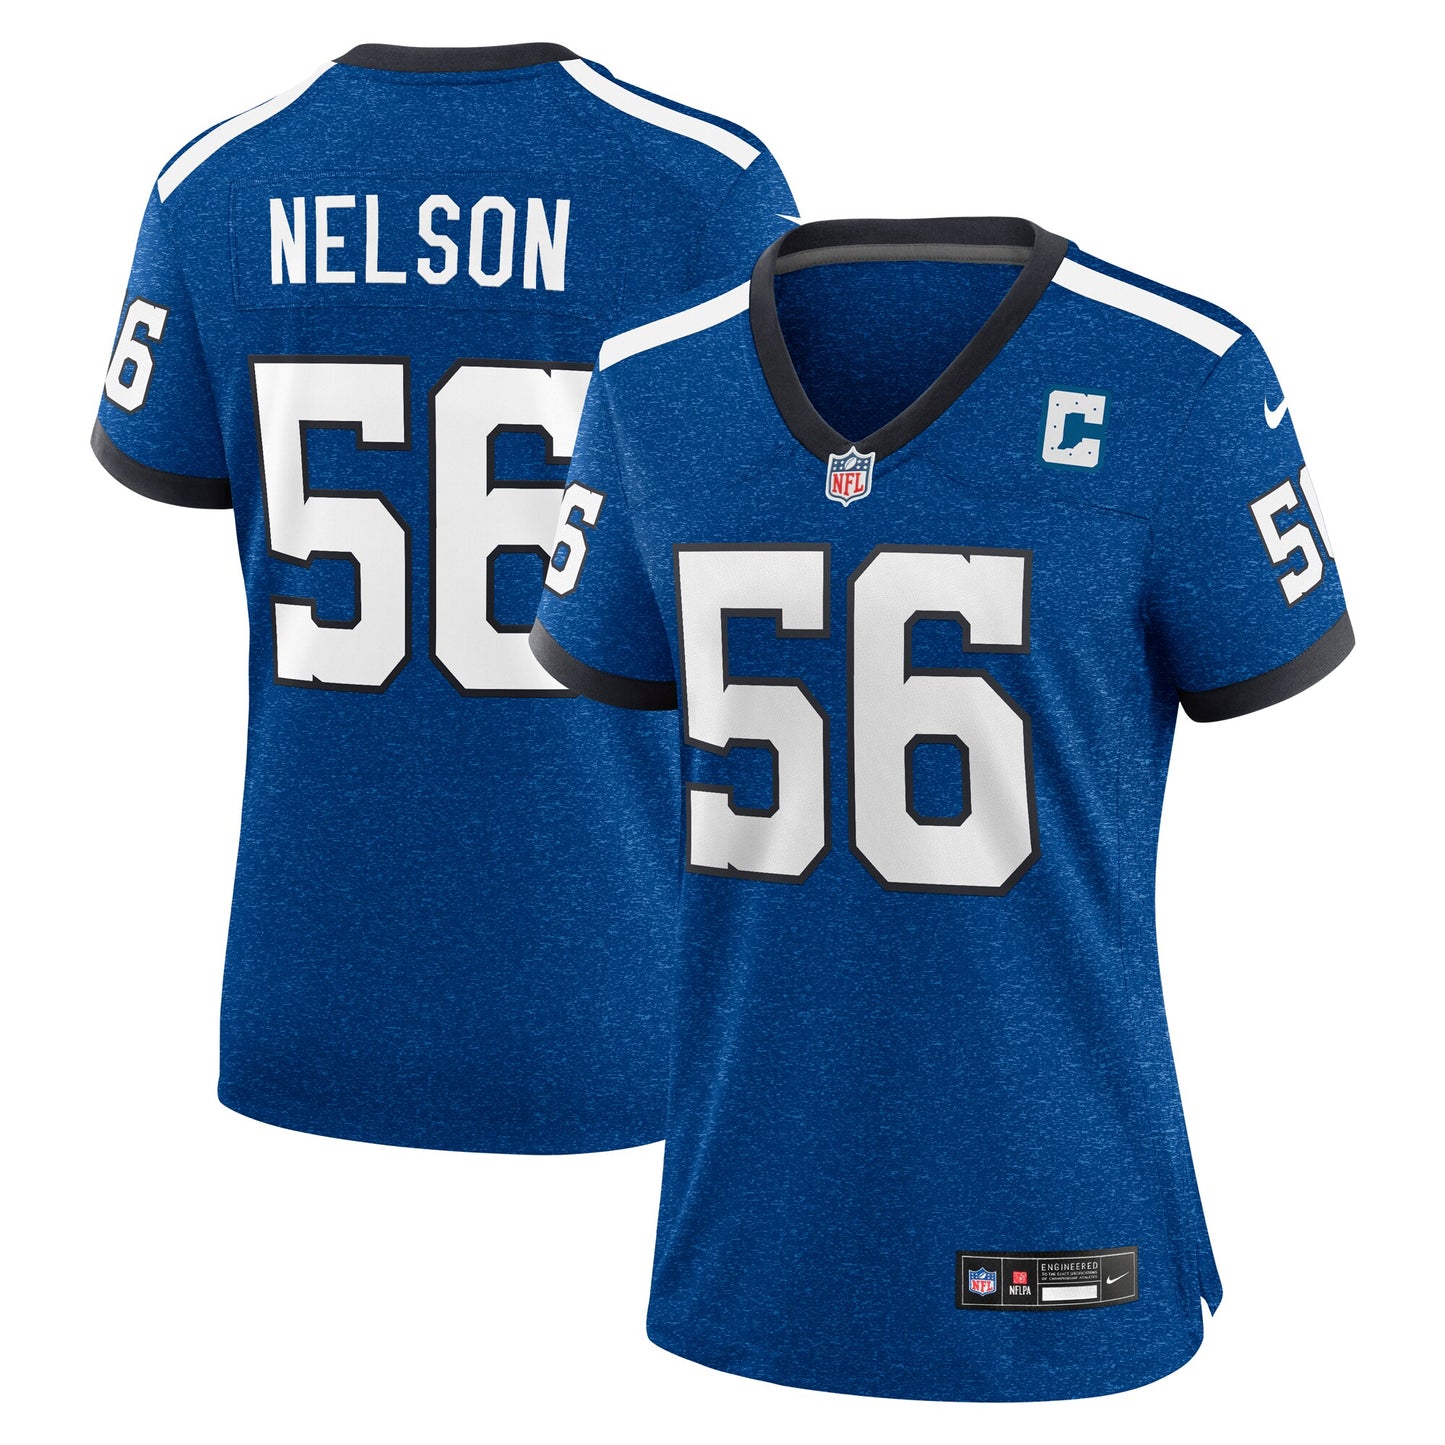 Quenton Nelson Indianapolis Colts Nike Women's Indiana Nights Alternate Game Jersey - Royal